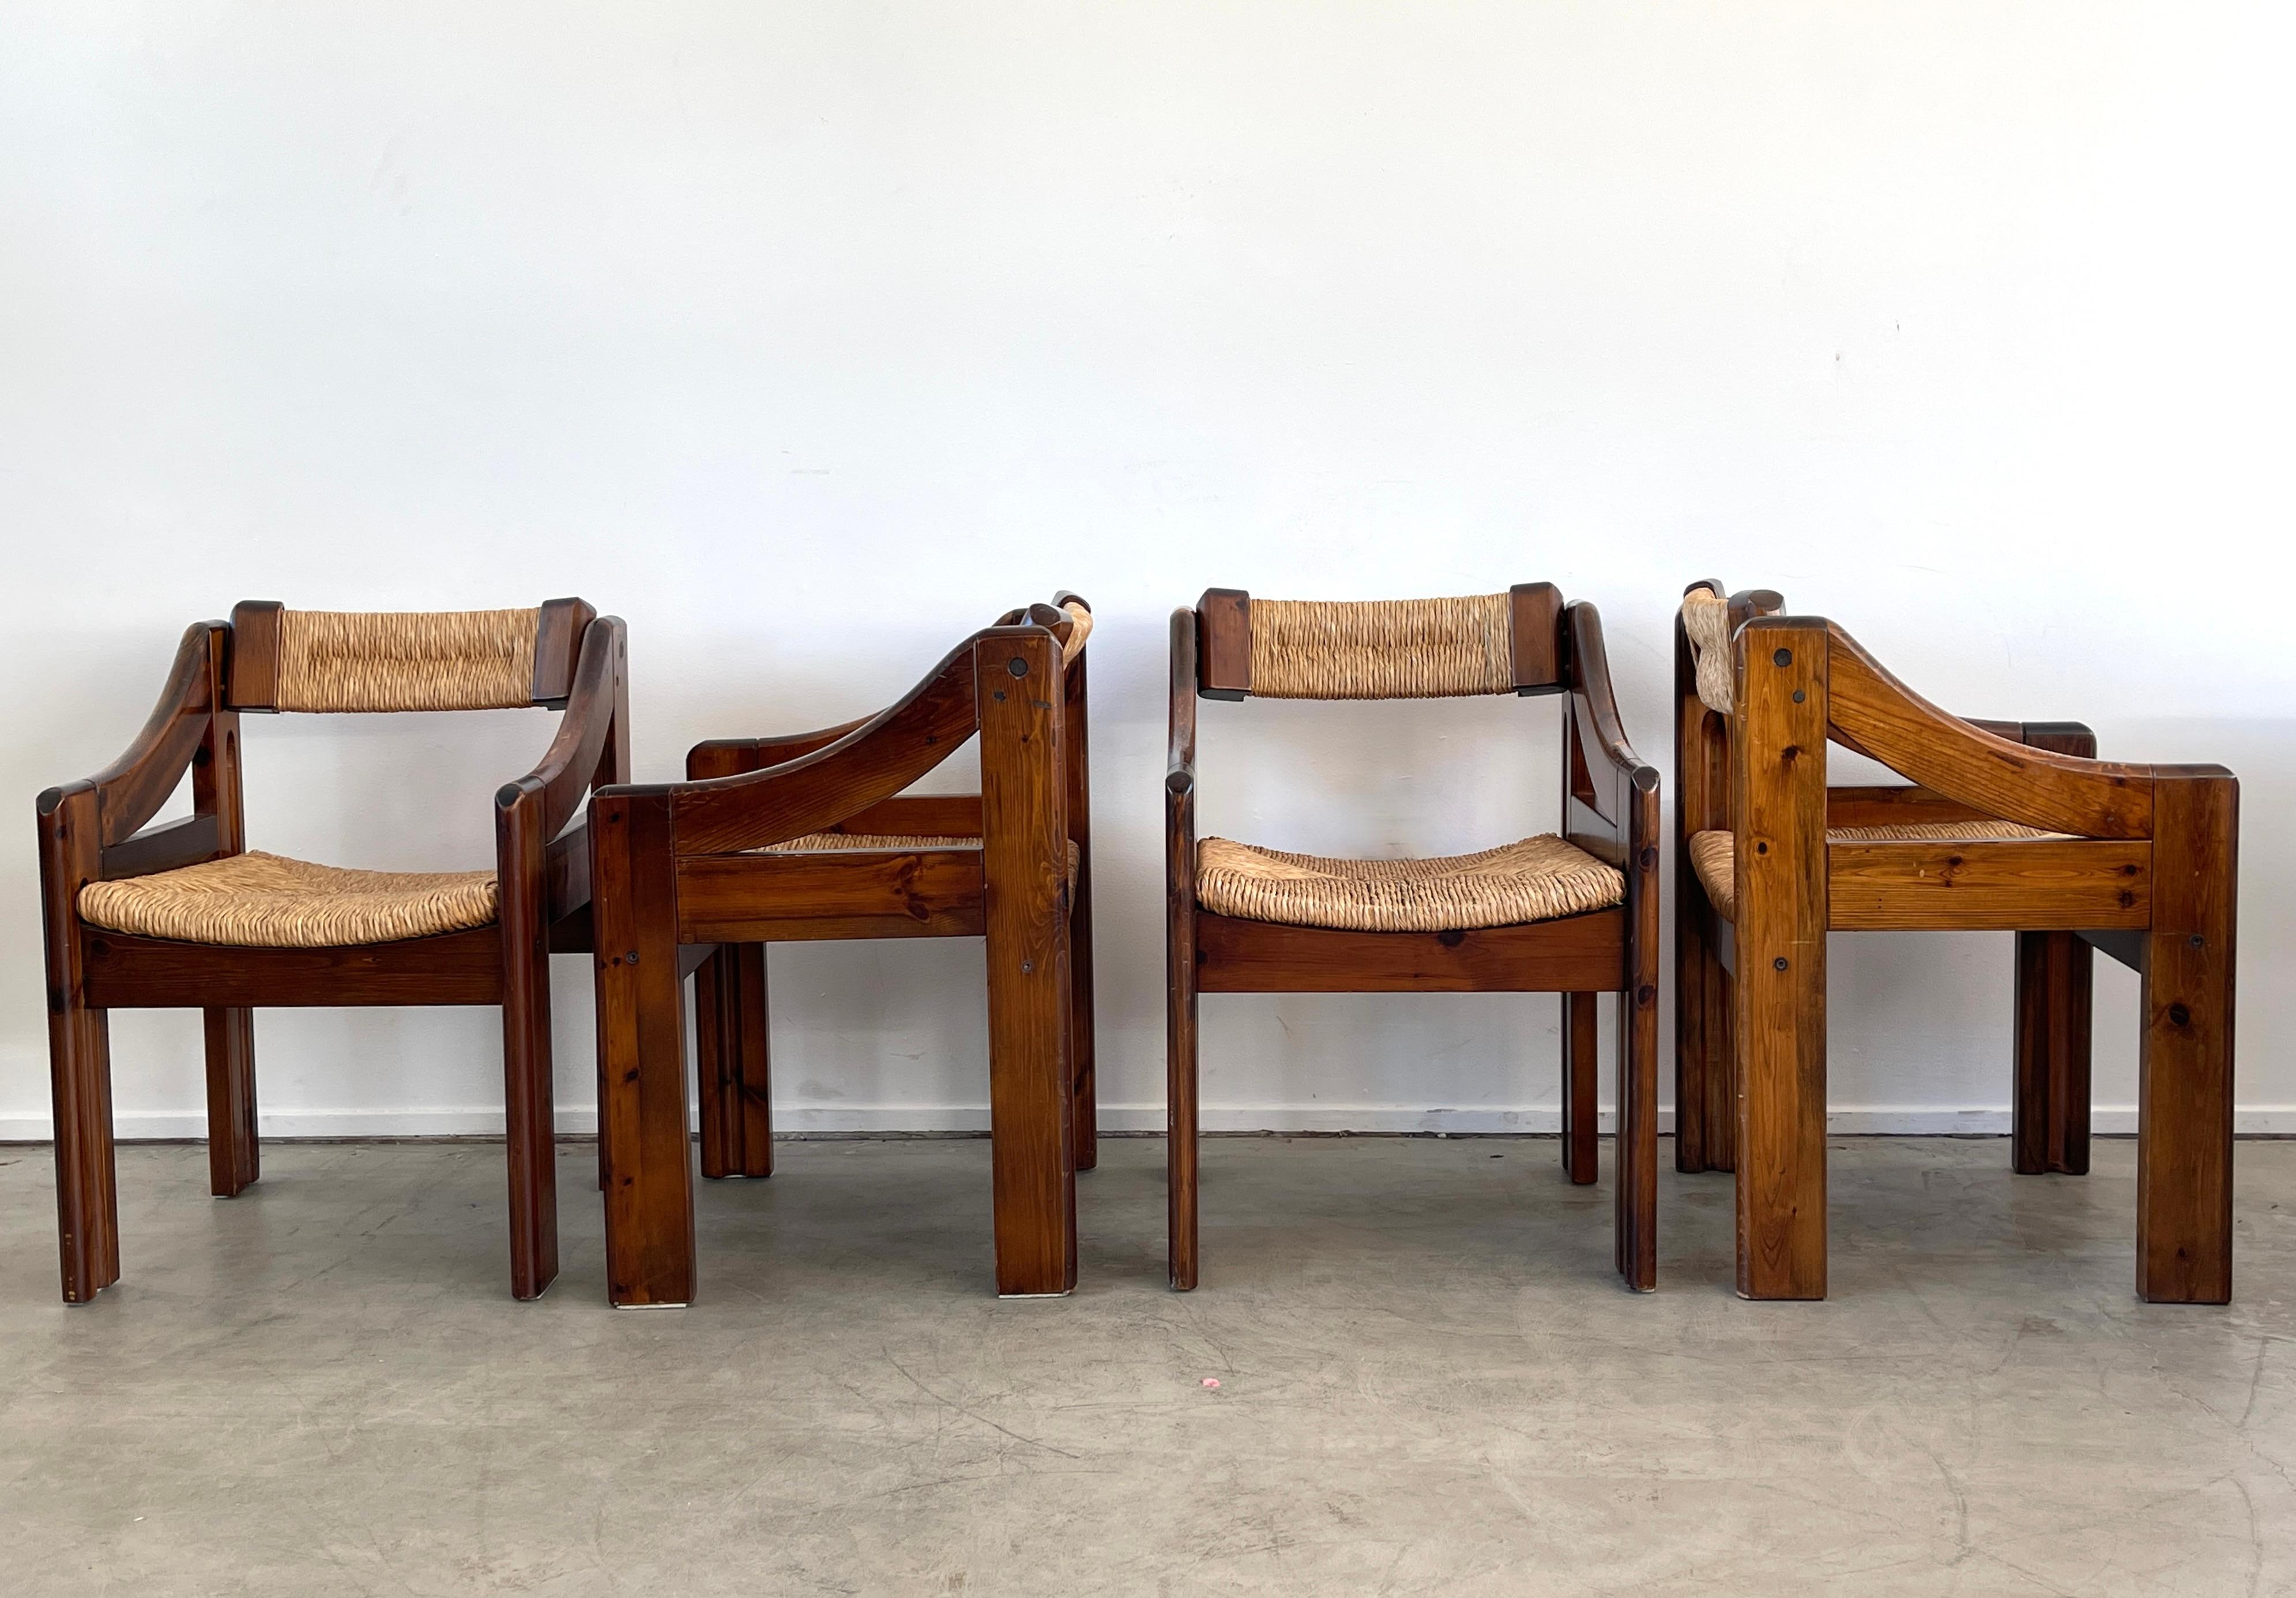 Set of 4 armchairs by Silvio Coppola for Frattelli Montina 
Italy, circa 1970's
Pine wood with wonderful patina 
Woven straw back and seat.